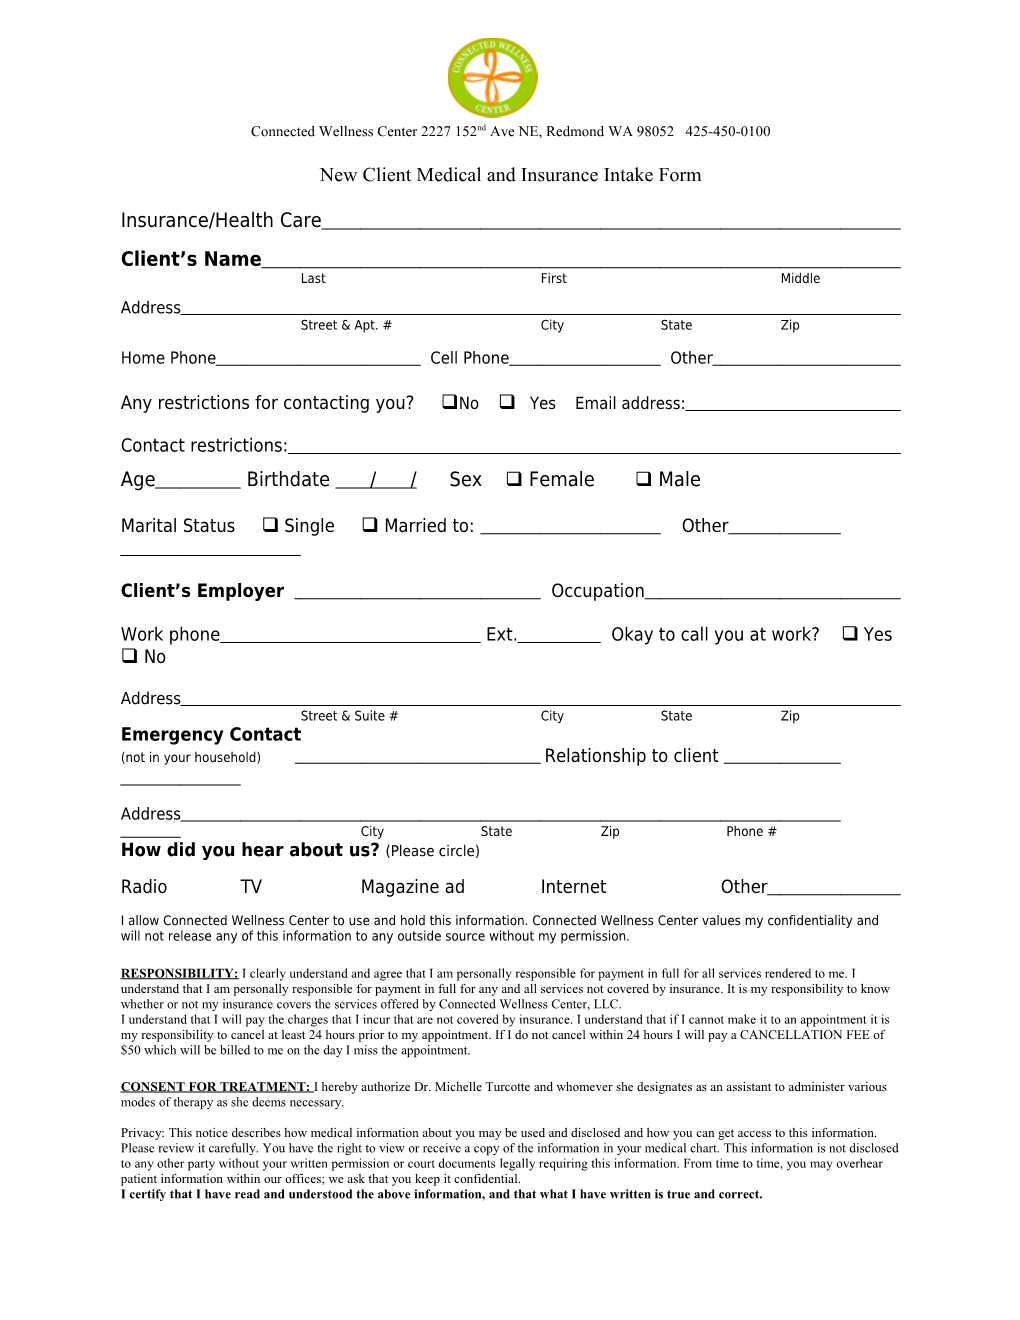 New Client Medical and Insurance Intake Form